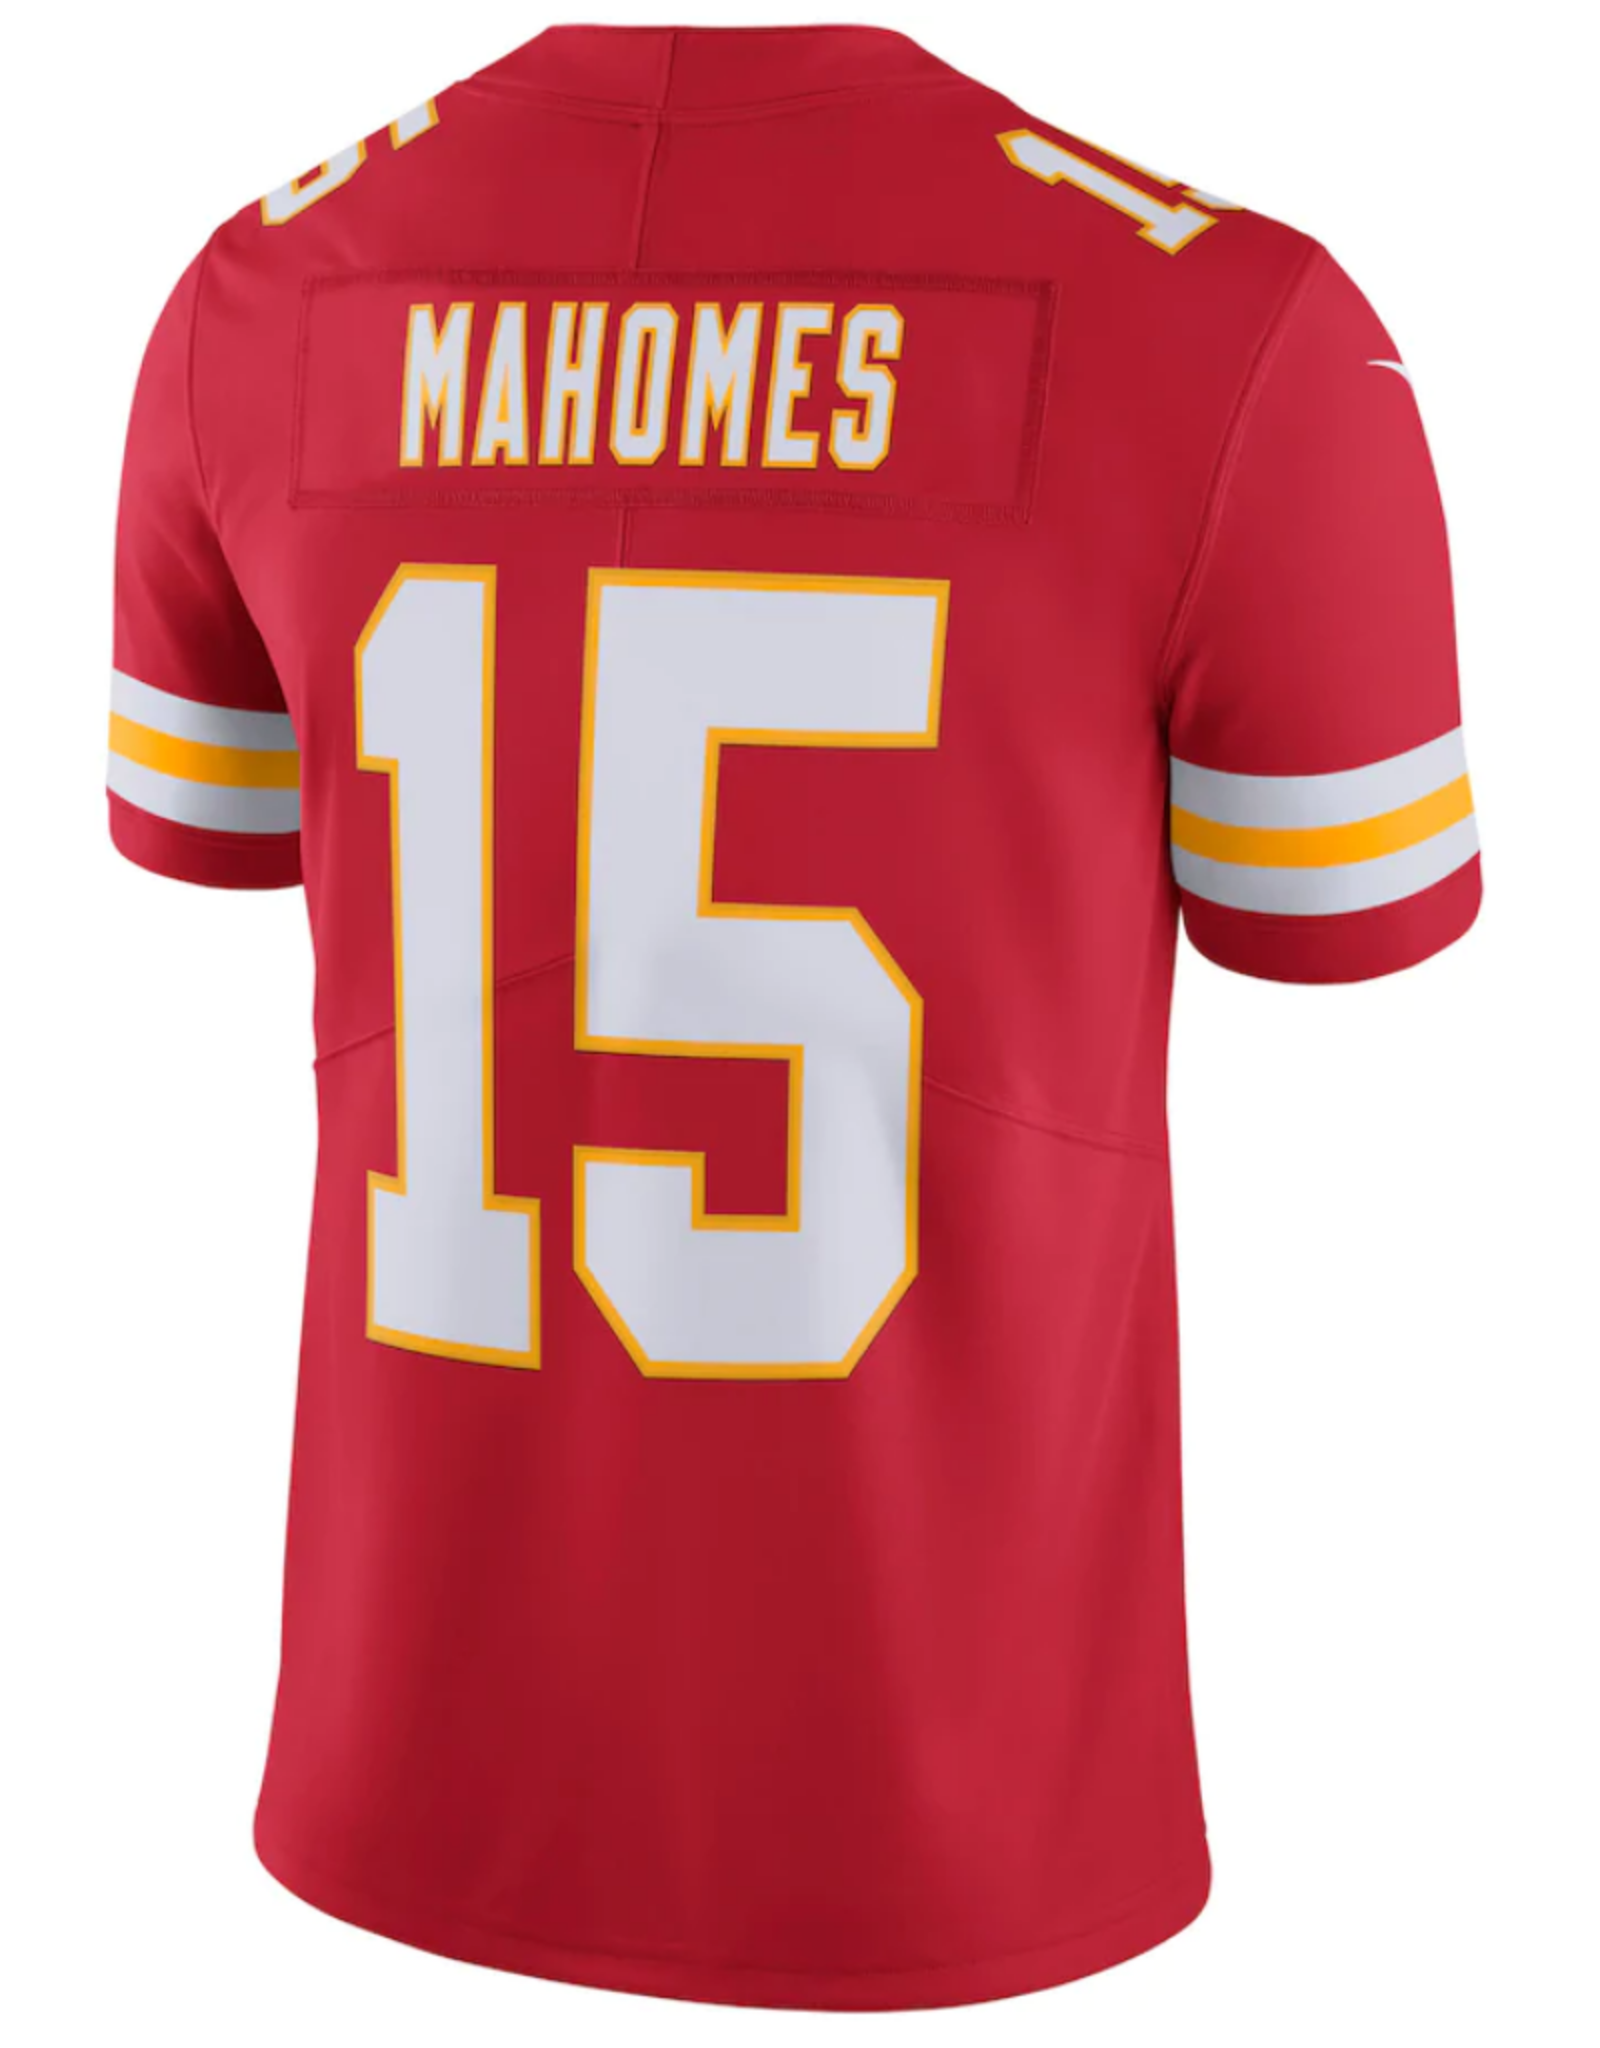 Nike Men's Limited Mahomes #15 Jersey Kansas City Chiefs Red